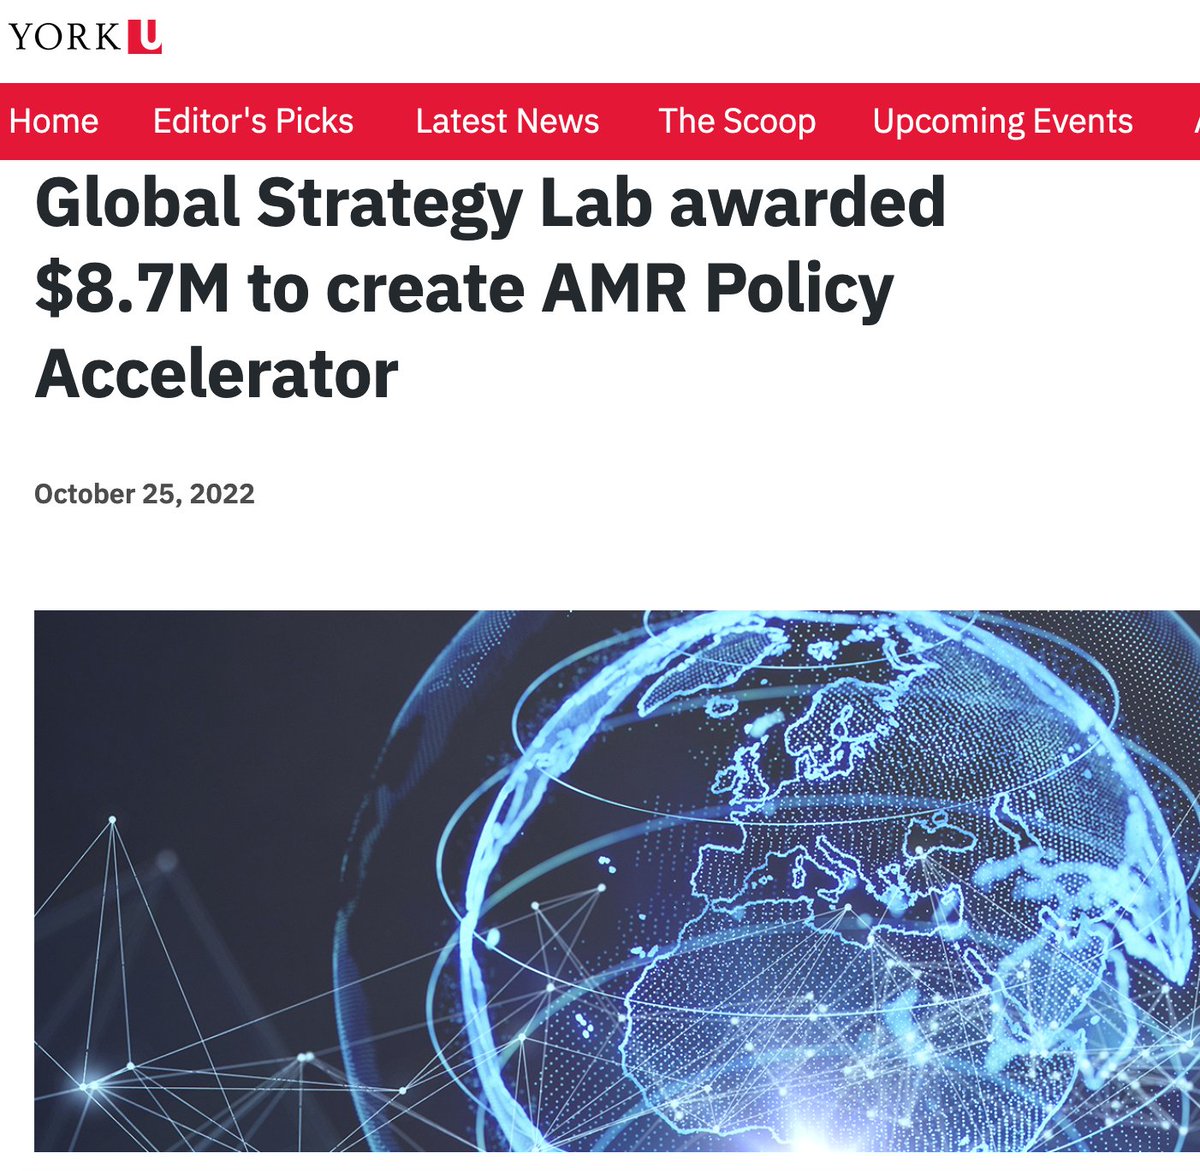 @YUGlobalHealth Professors and @gstrategylab Investigators (@shoffmania @MathieuJPP @PH_ethics_law @TarraPenney) will bridge science and policy to support evidence-informed antimicrobial resistance policy making around the world. yfile.news.yorku.ca/2022/10/25/glo…